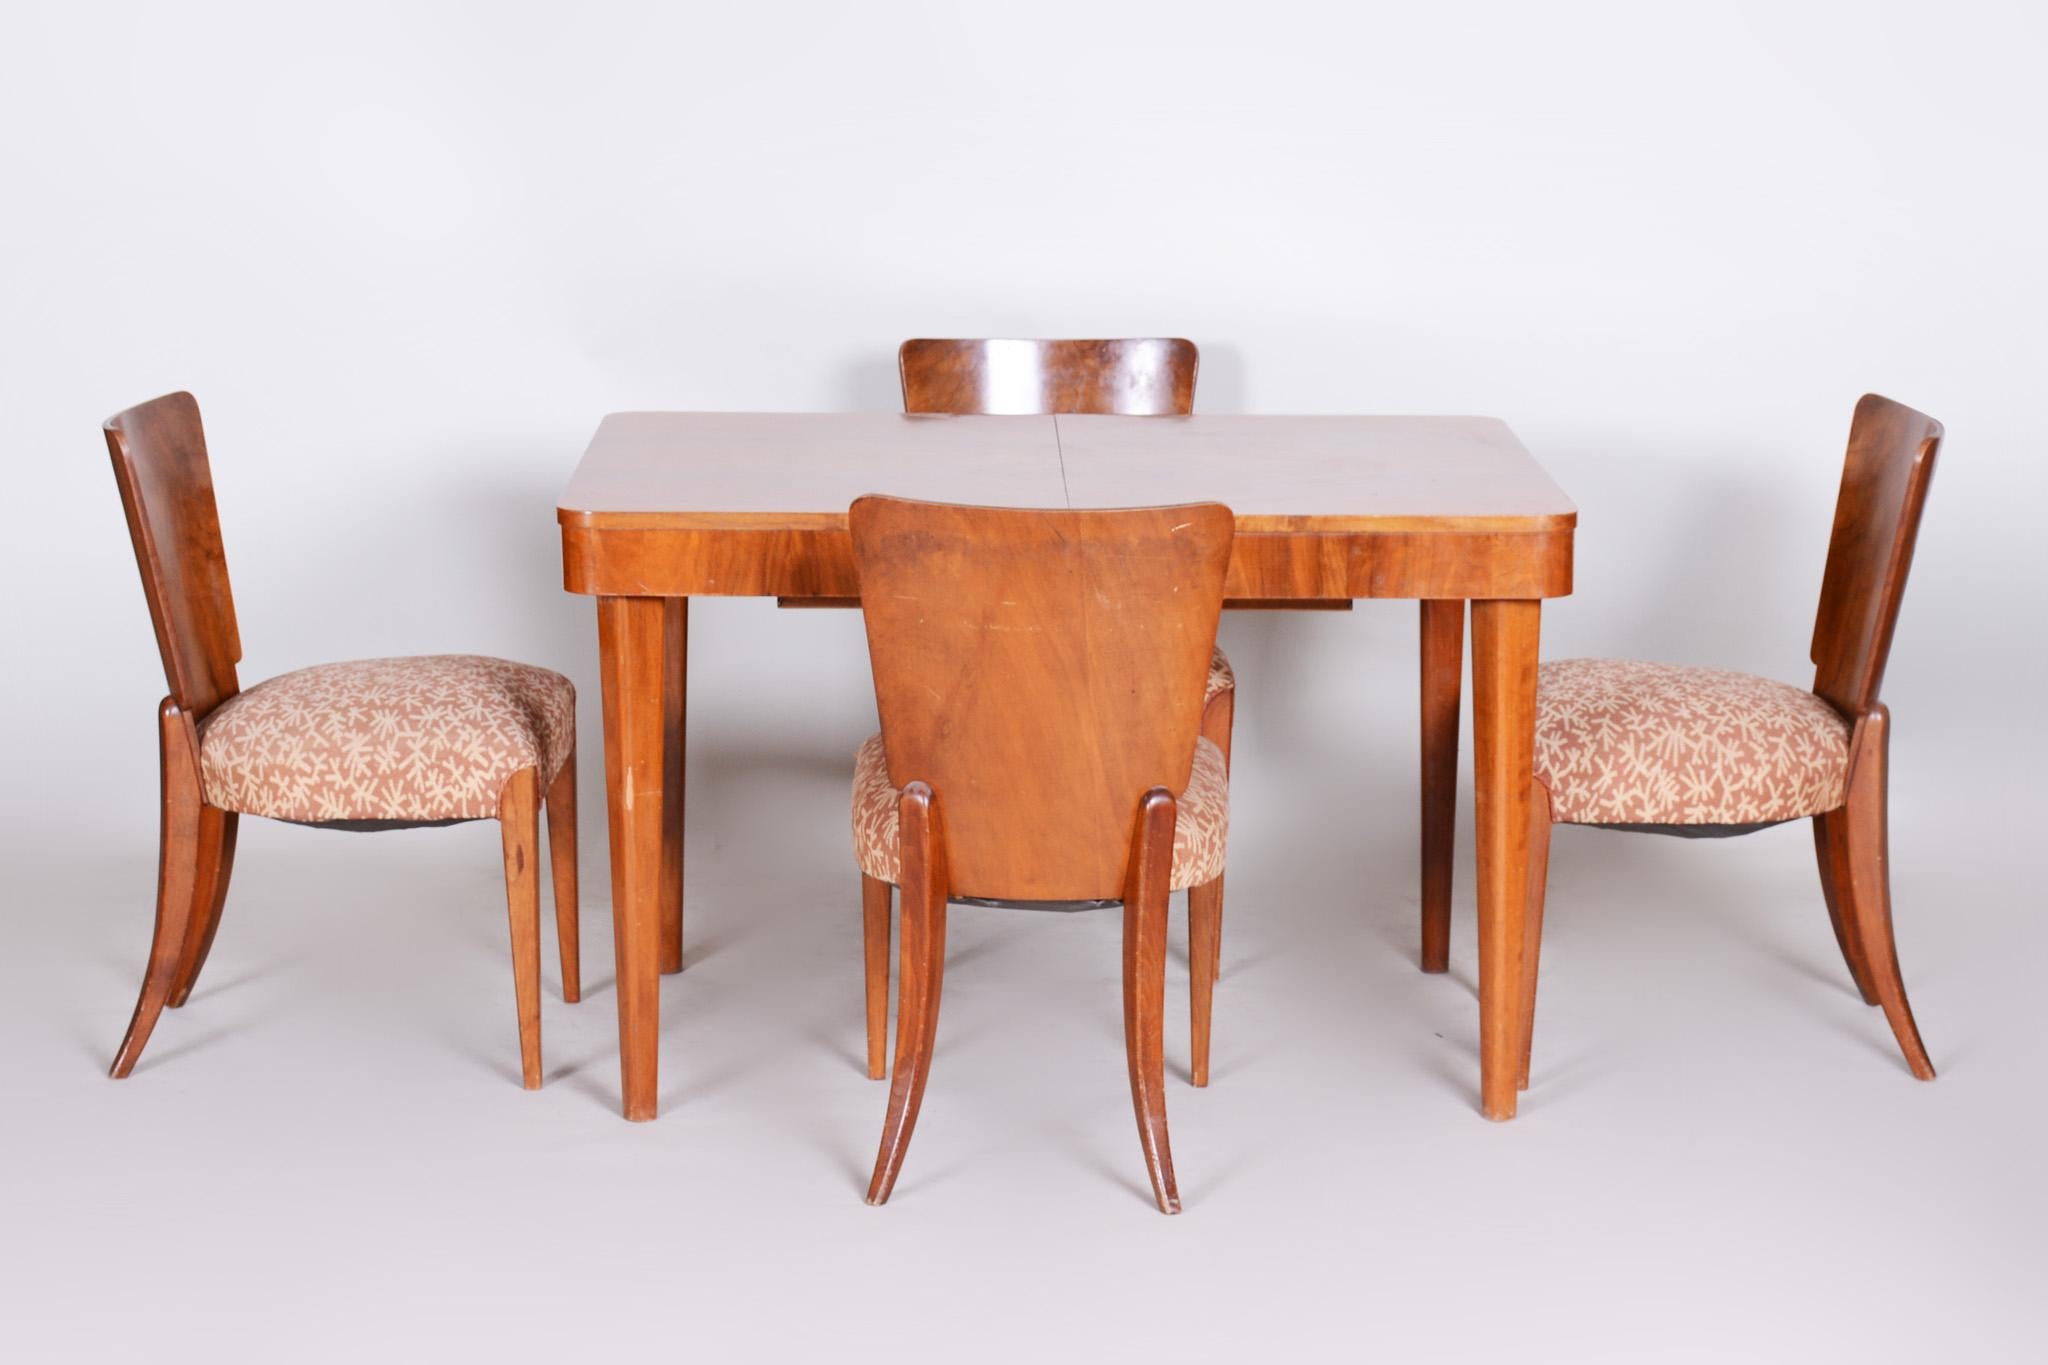 Lacquer Dining Table, Designed by Jindrich Halabala, 1940s, Made by Up Závody For Sale